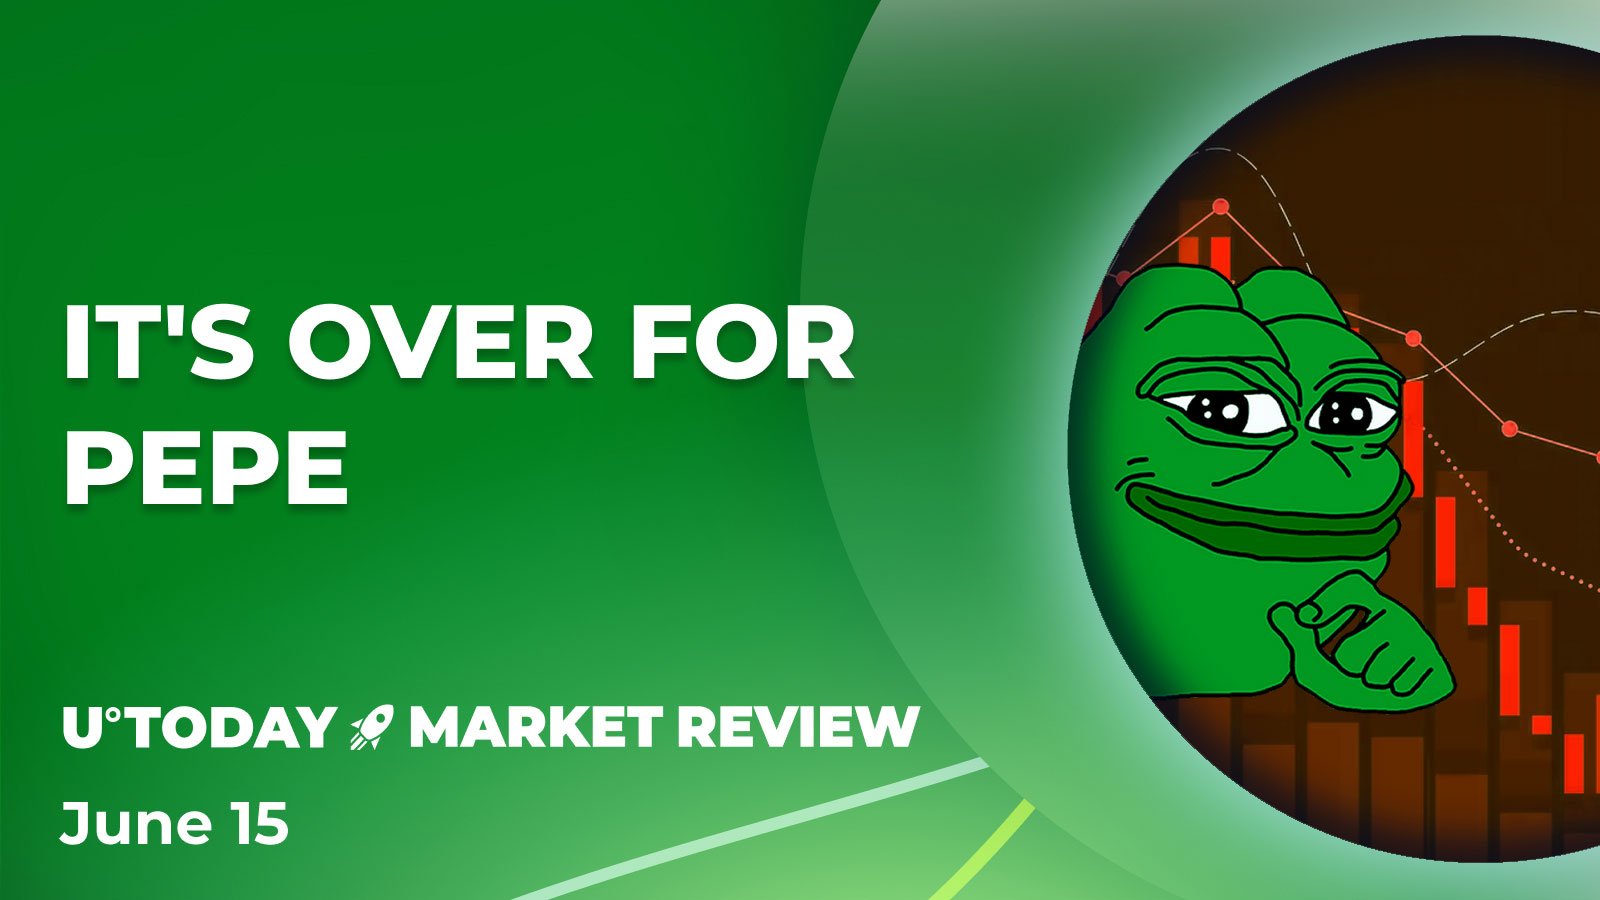 'It's Over' for Pepe (PEPE) as Meme Coin Loses 90% of Gains